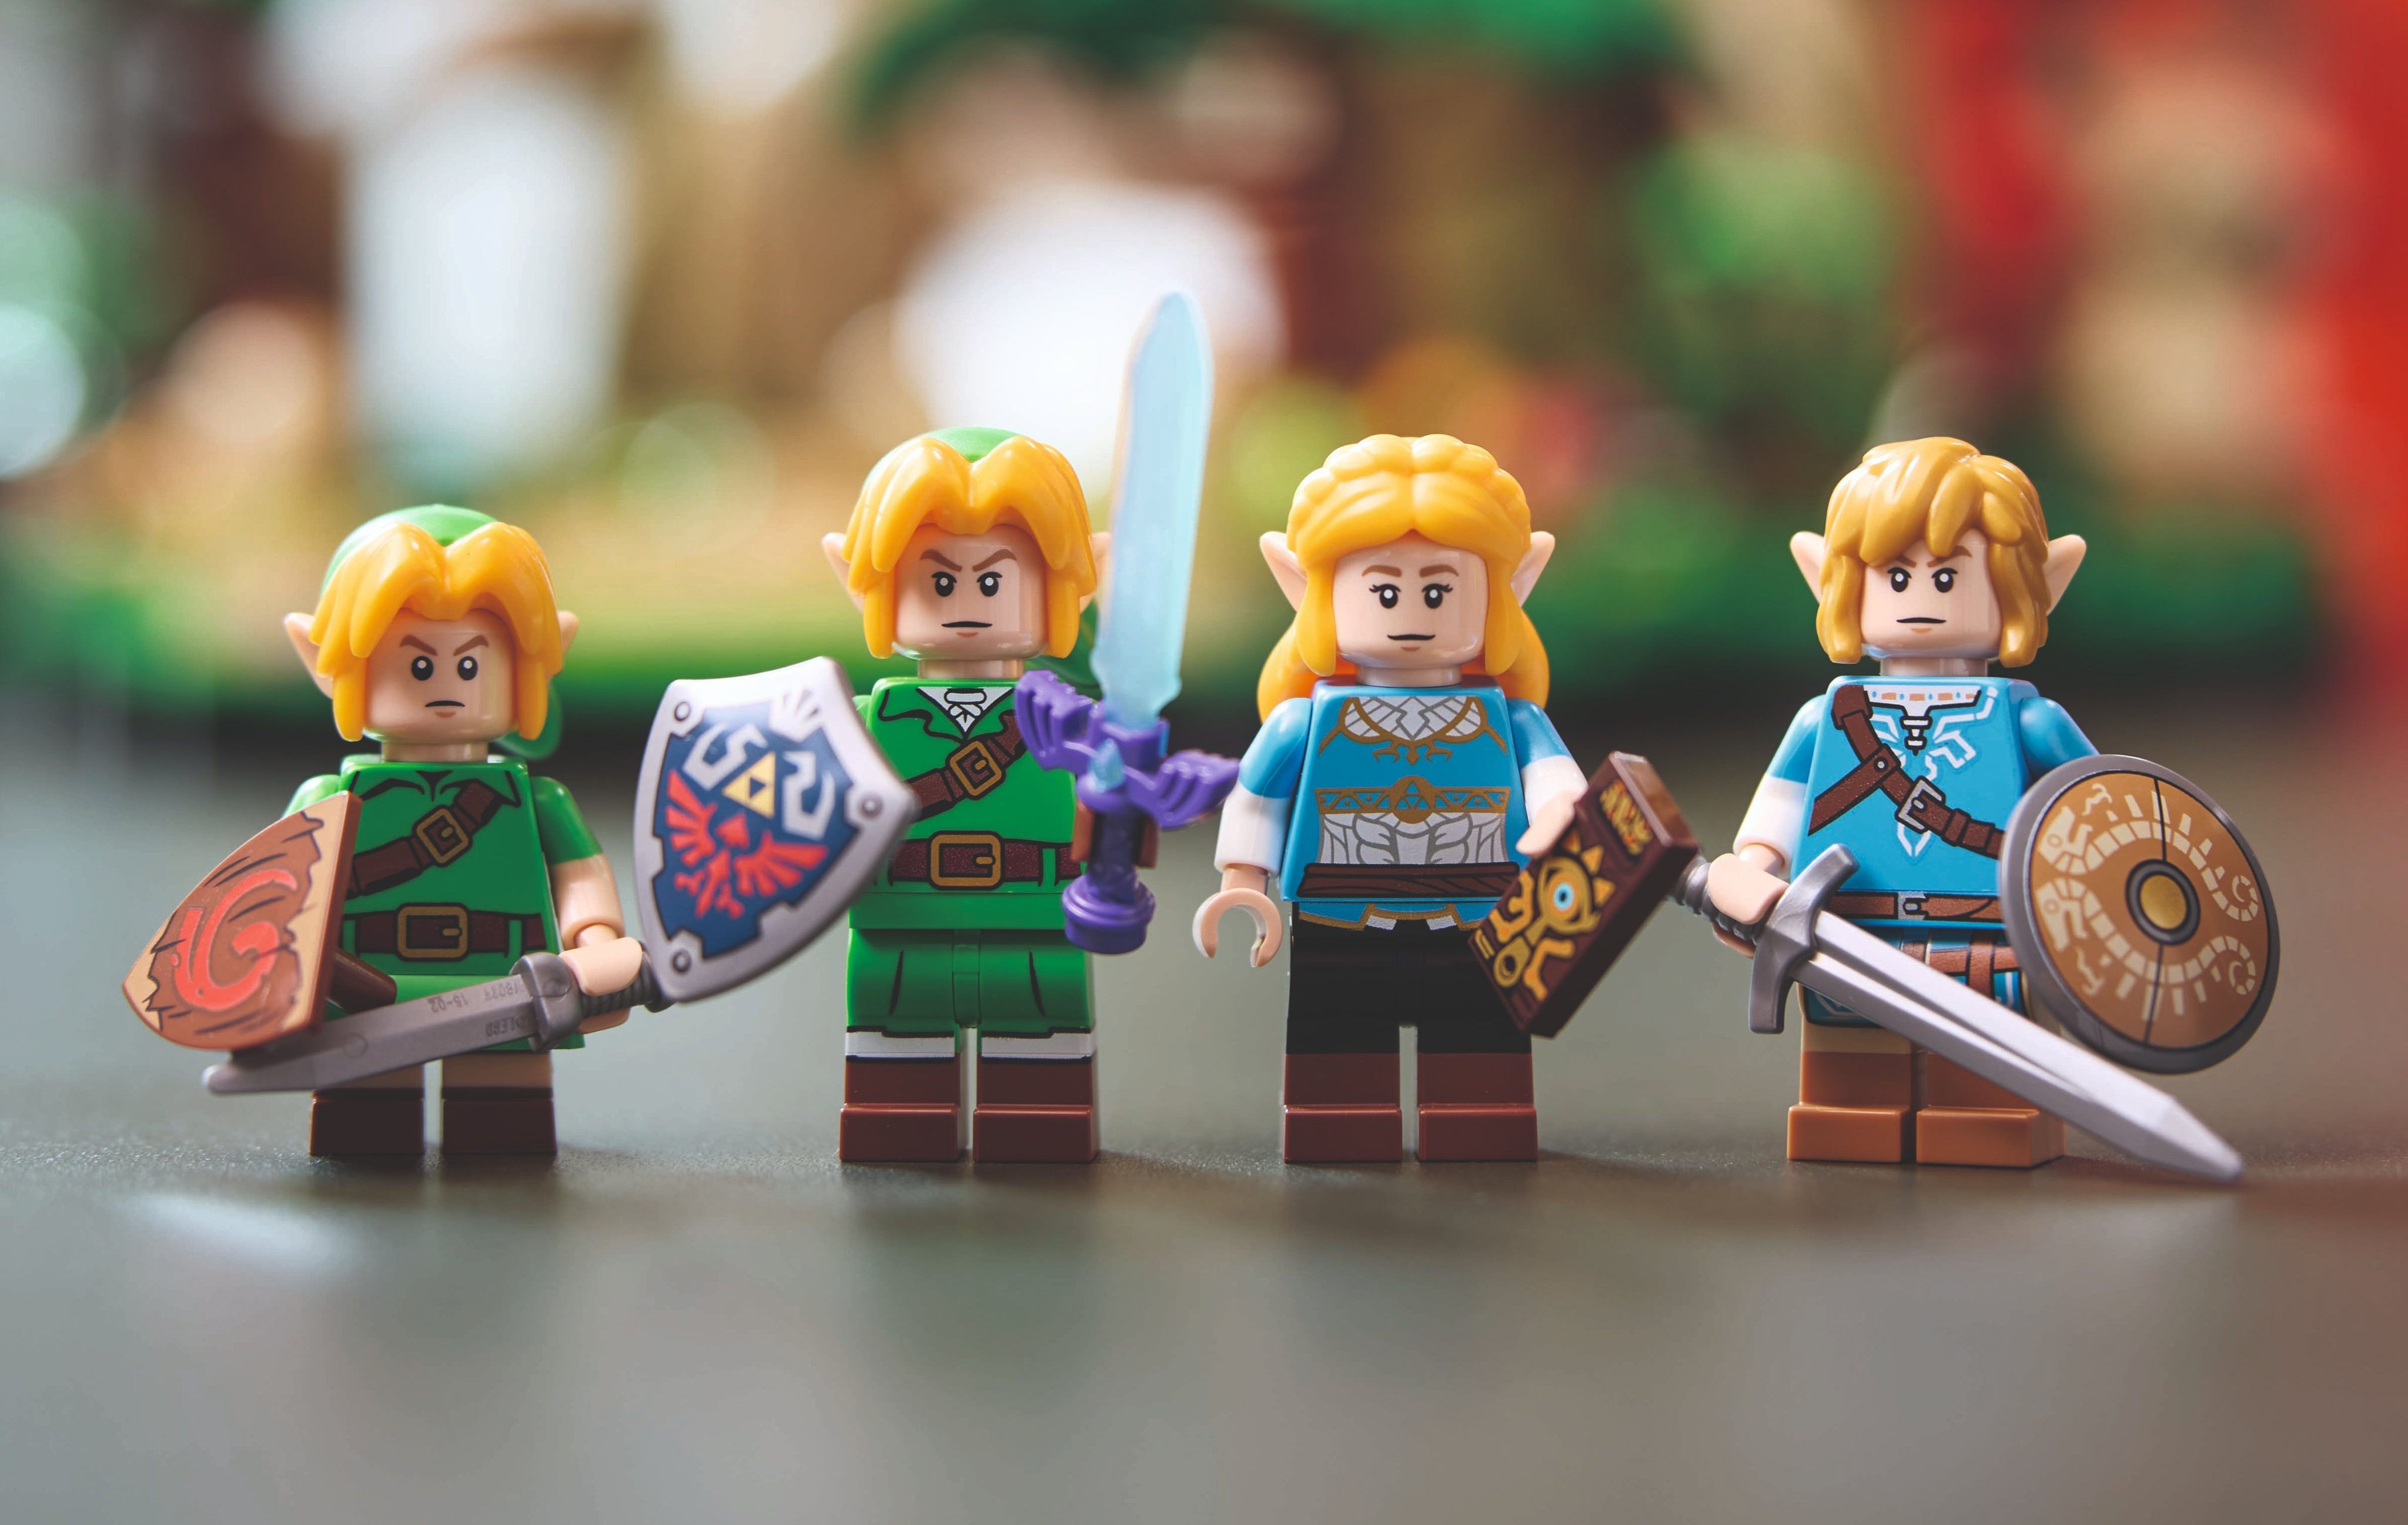 Link minifigures from upcoming LEGO set